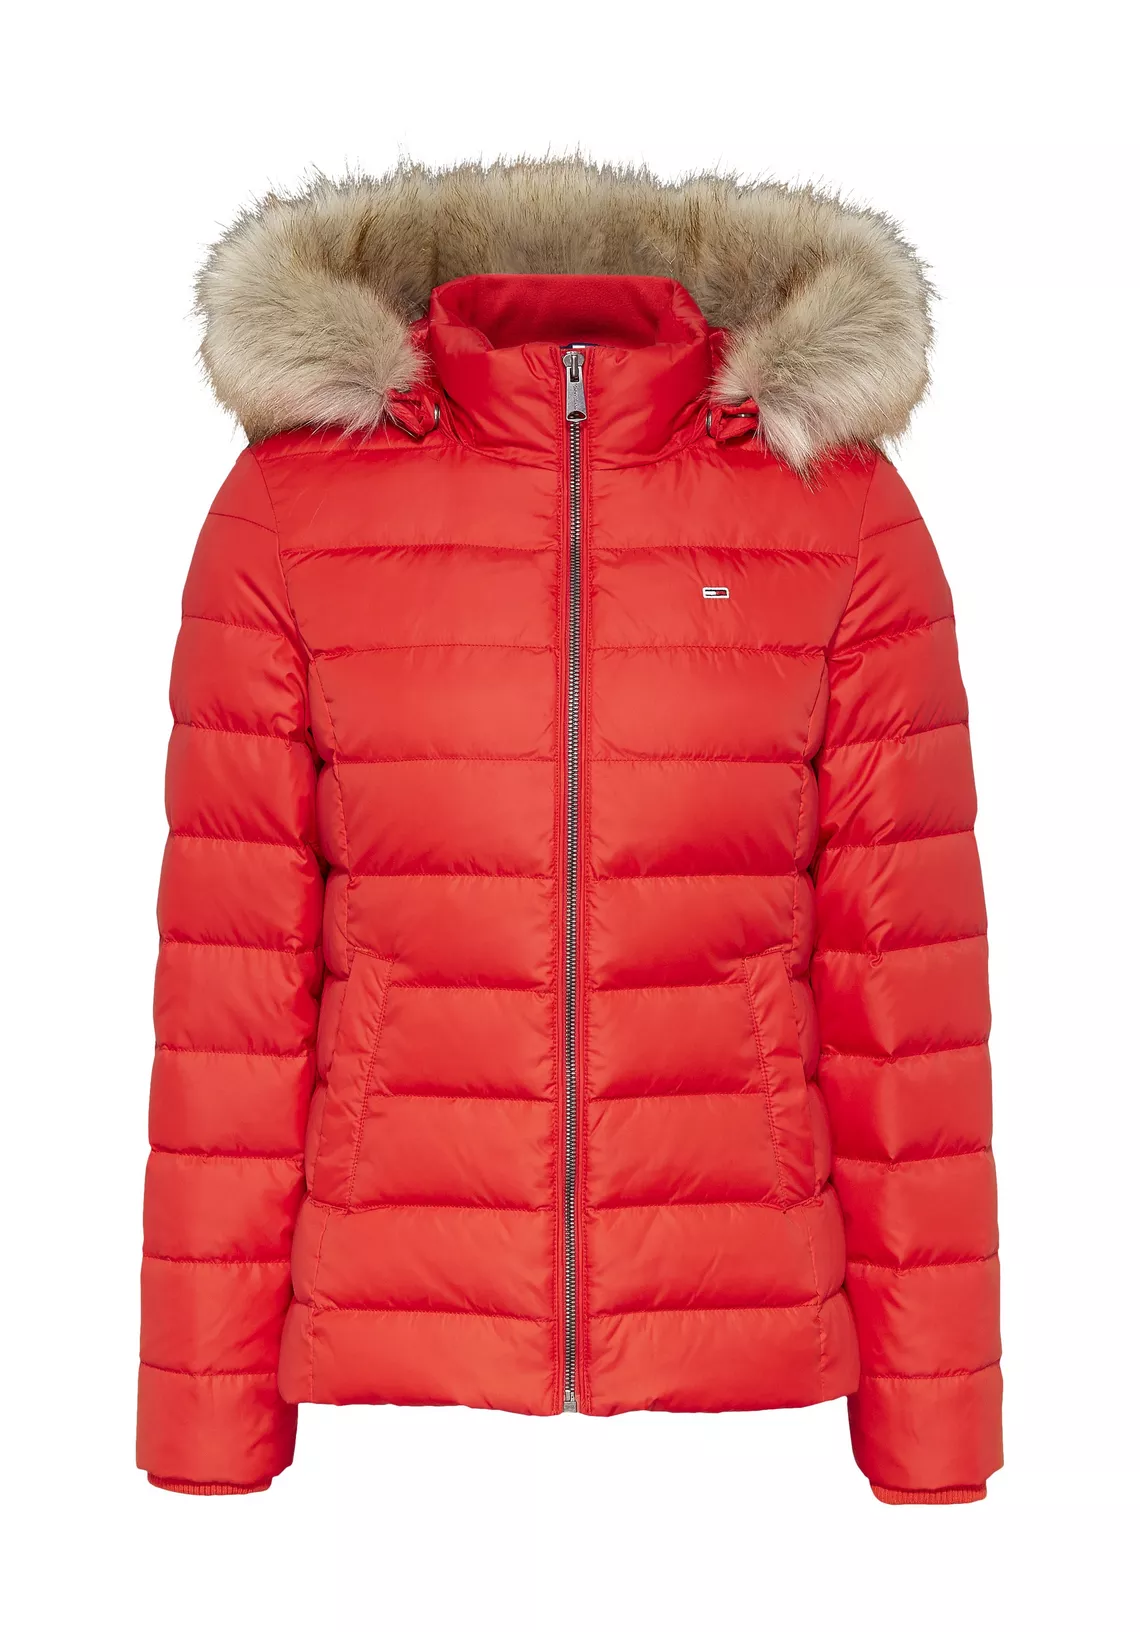 Tommy Hilfiger Basic Hooded Winter Coat Women, red